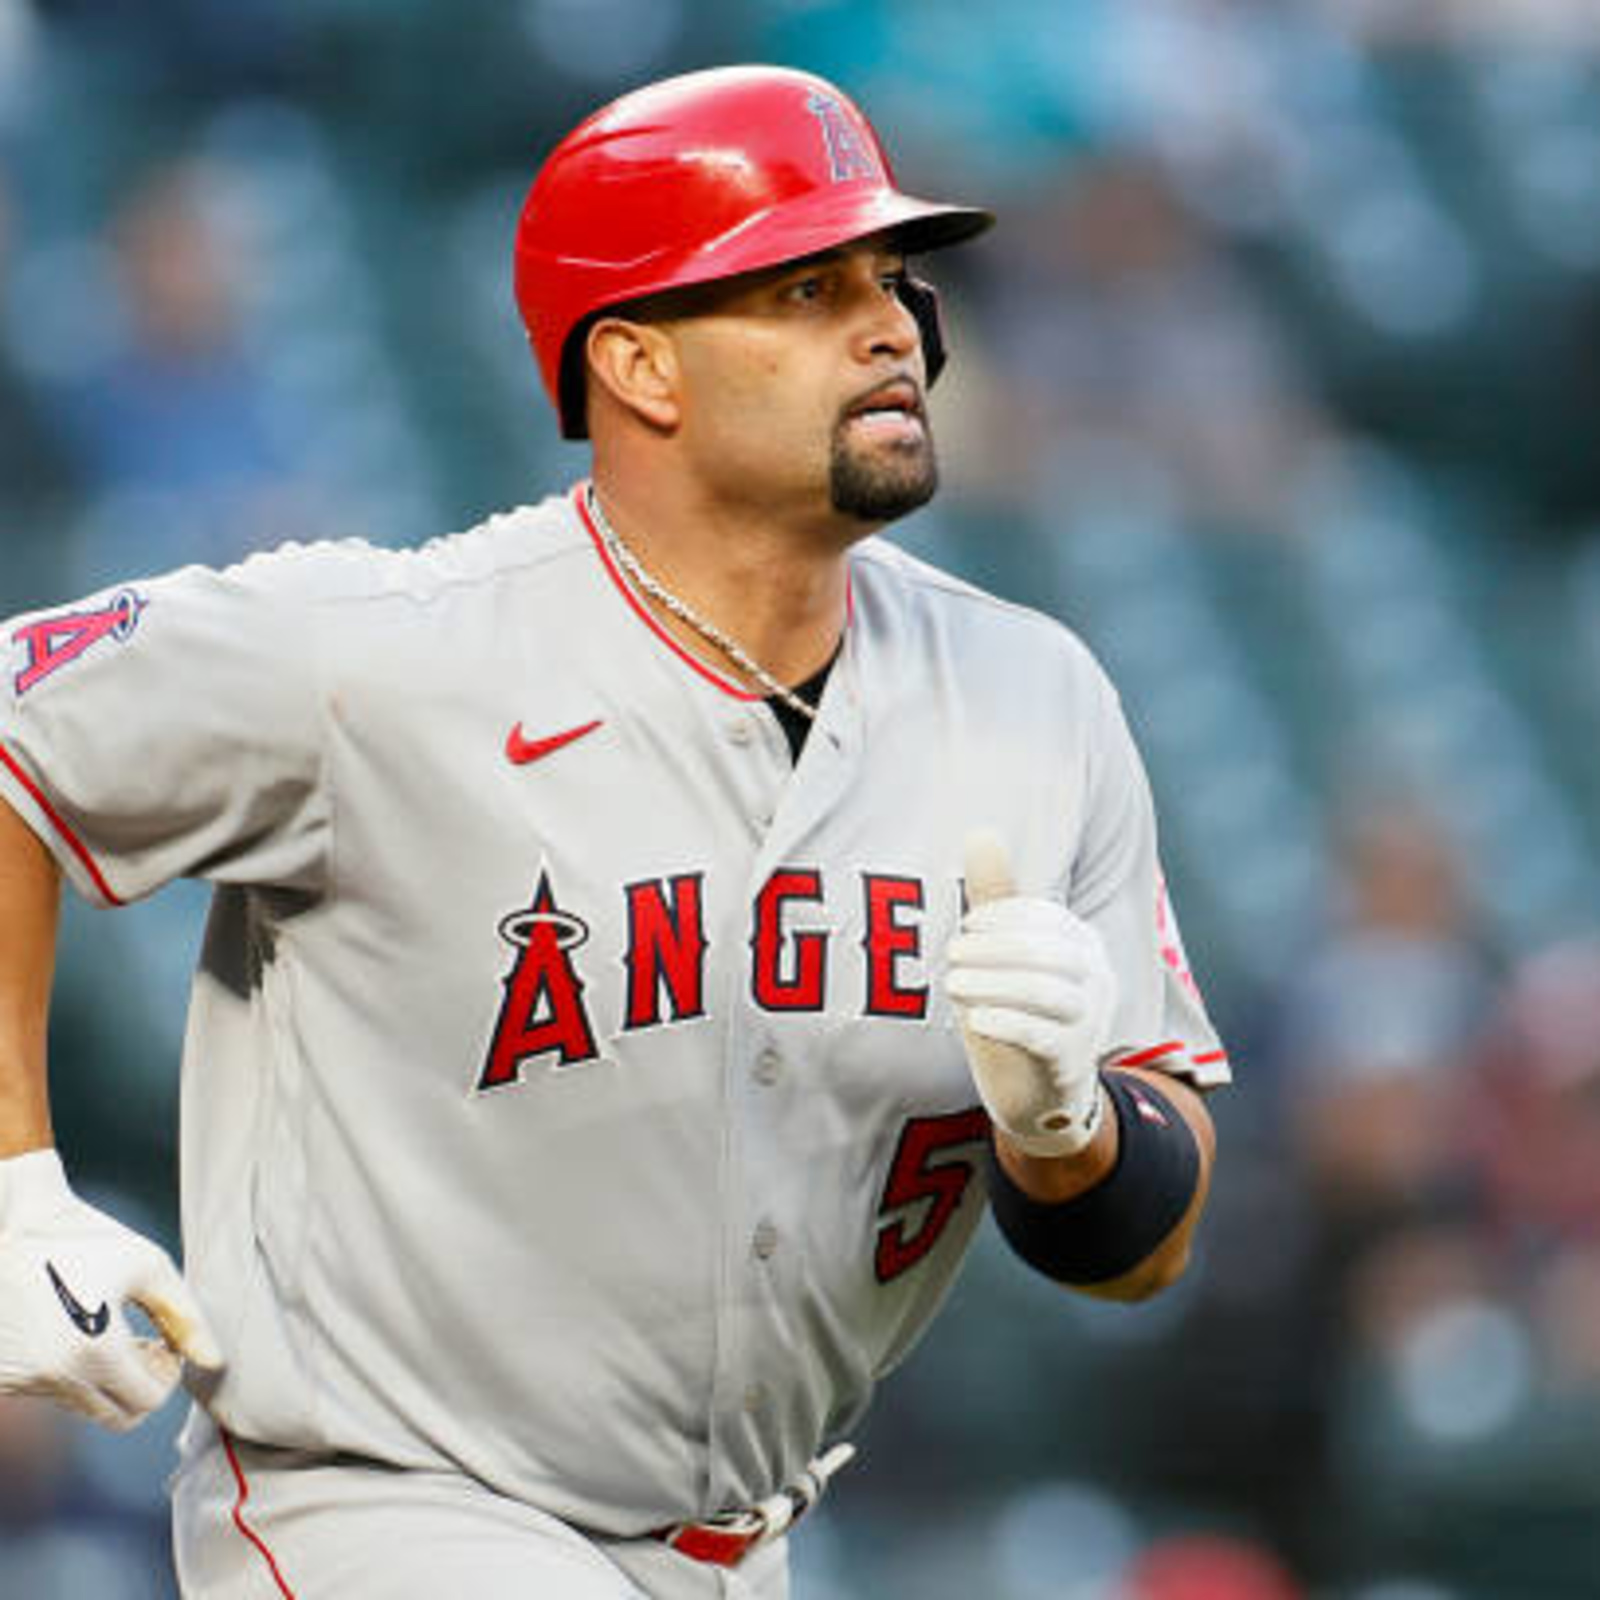 Pujols signs with Angels: 10 years, $254 million